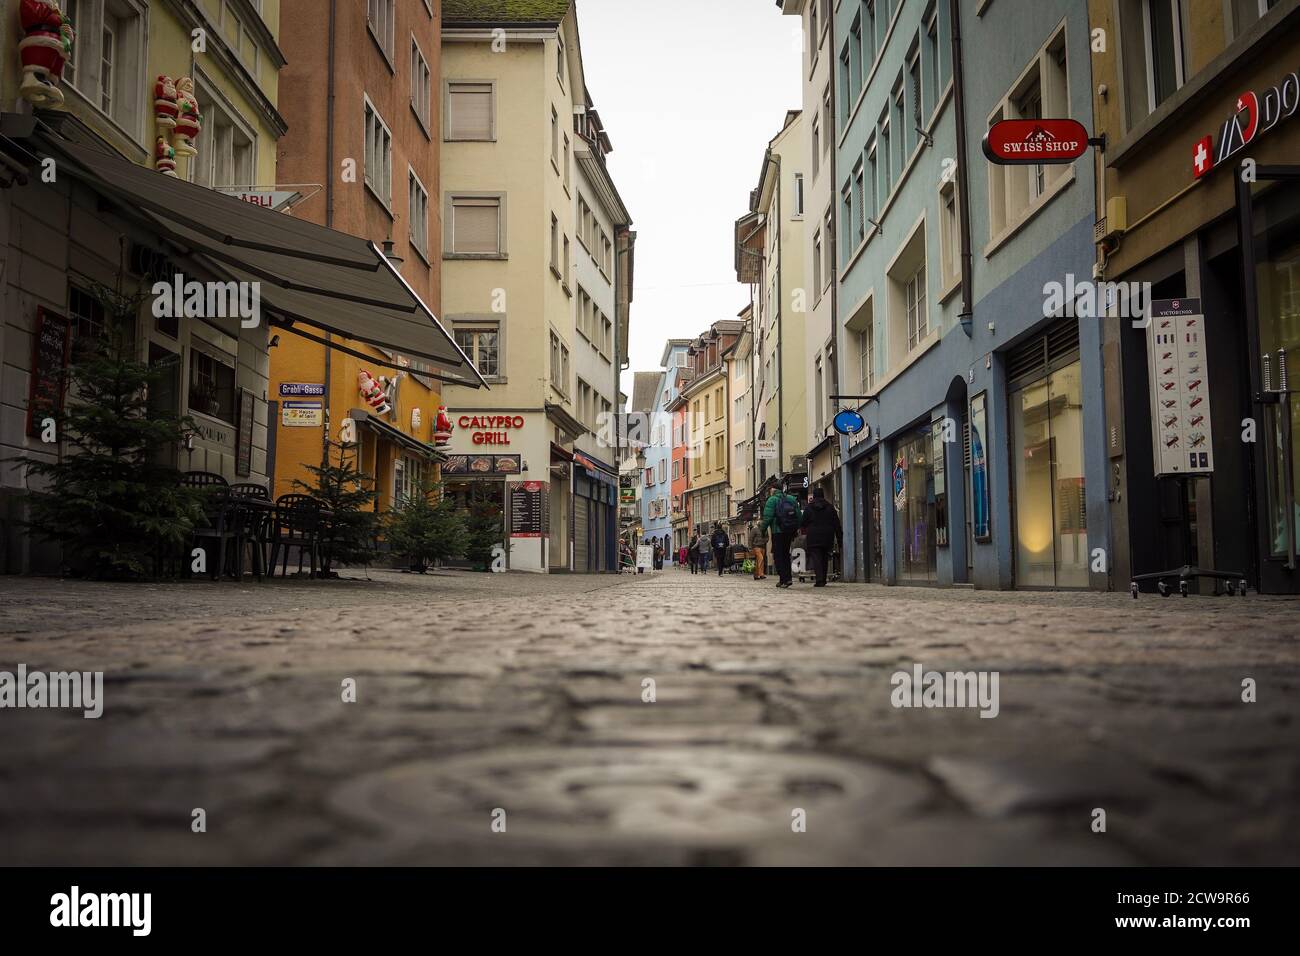 The beautiful Zurich Old town Stock Photo